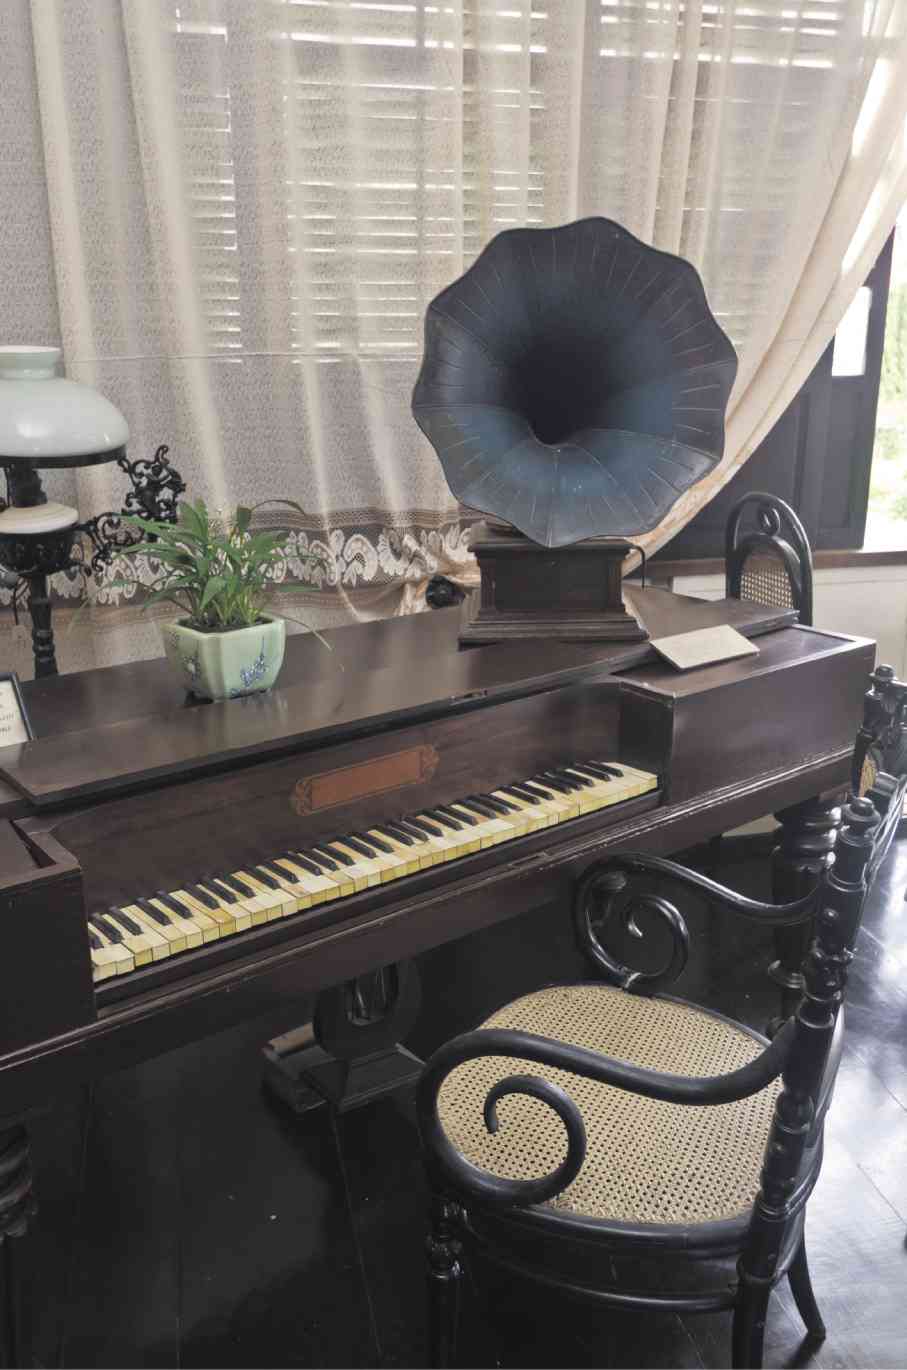 VIENNESE bentwood chair, the gramophone and antique piano